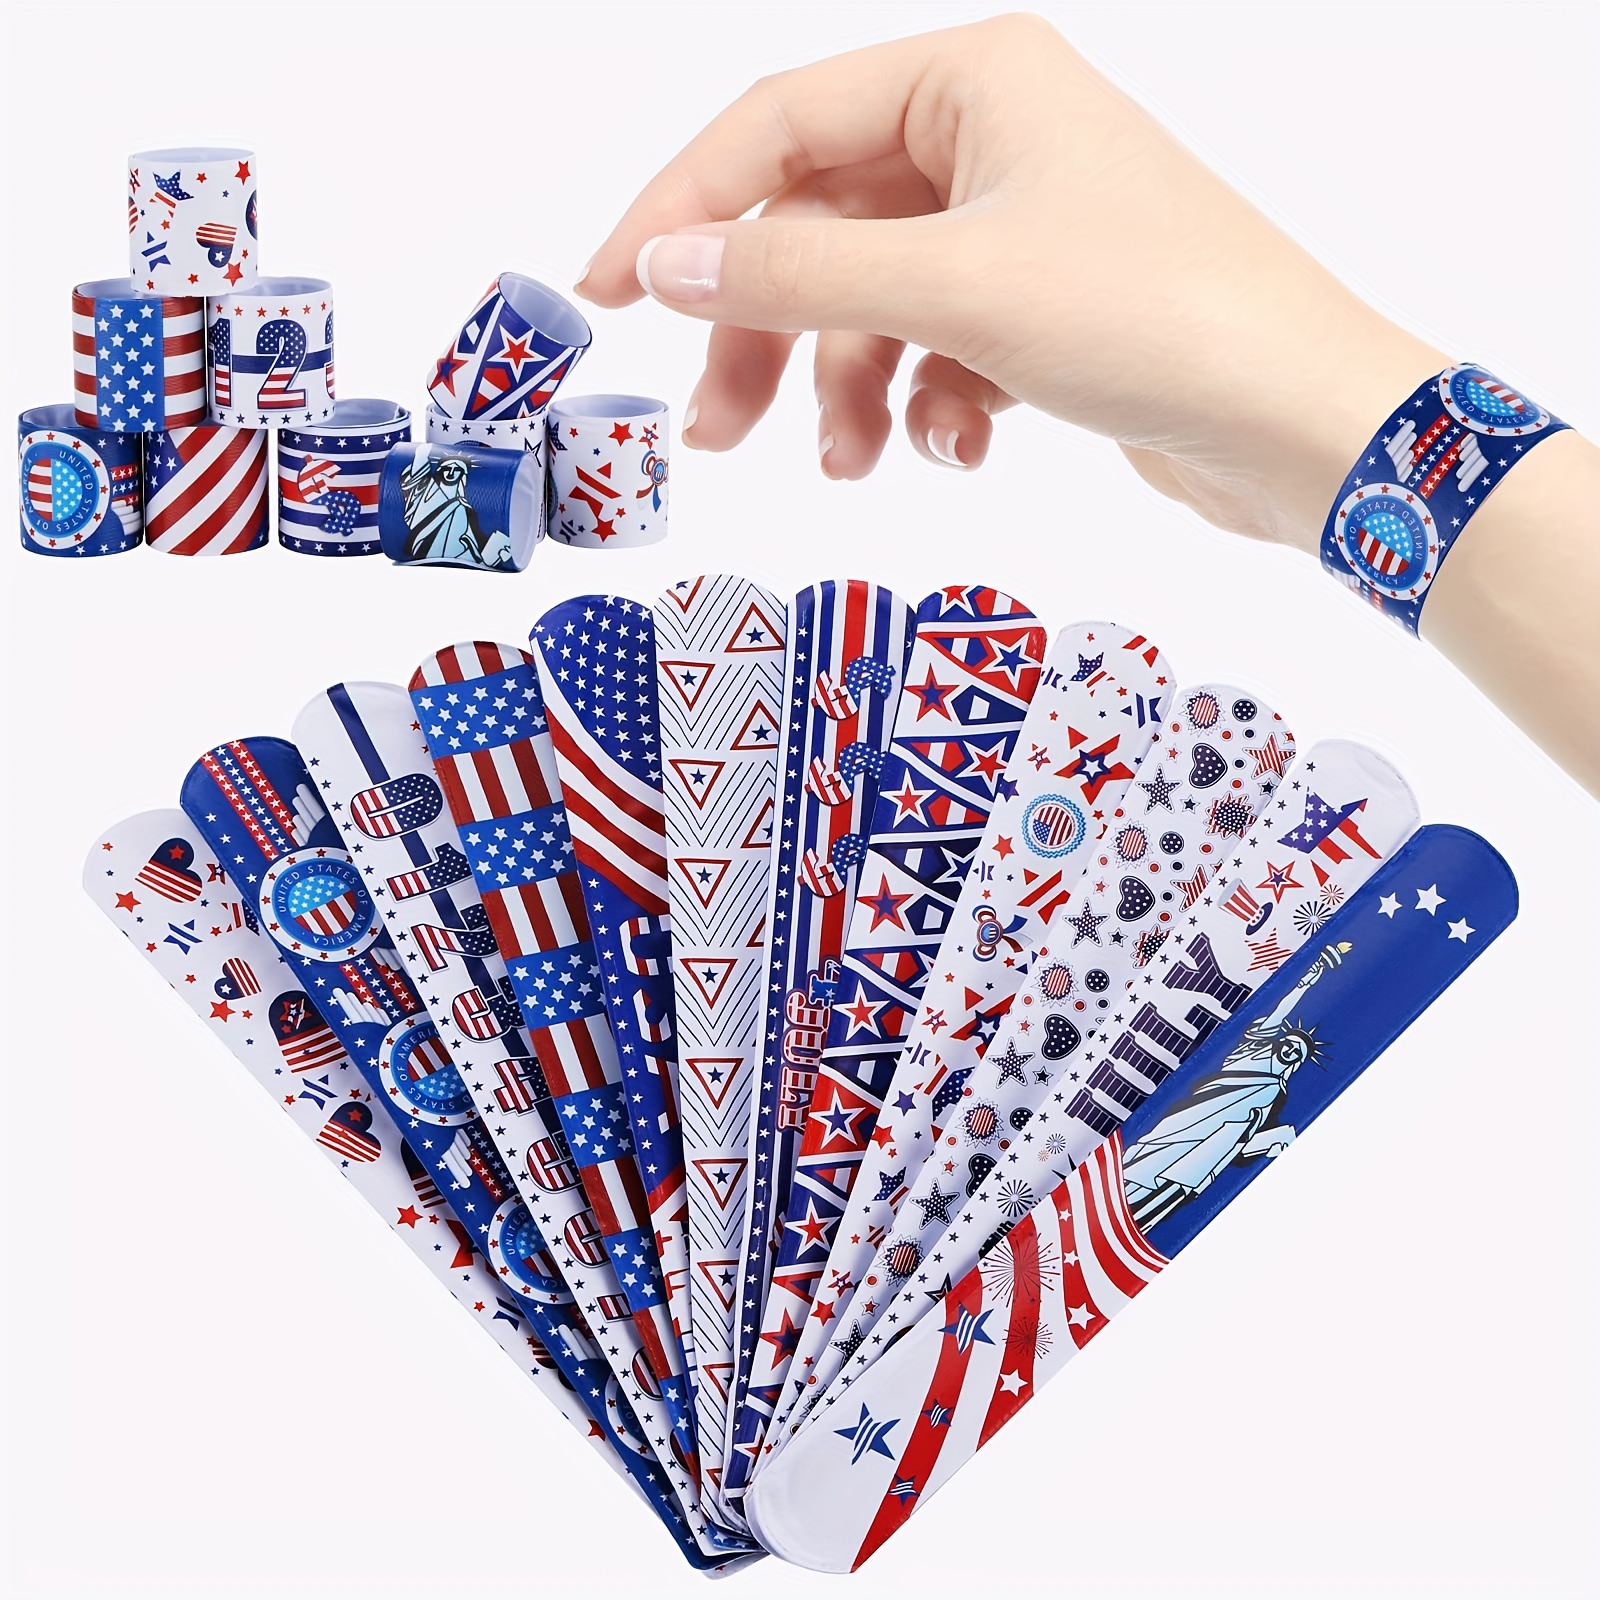 

12pcs, 4th Of July Party Favors Patriotic Decorations American Flag Slap Bracelets Wristbands Red White And Blue Accessories For Independence Day